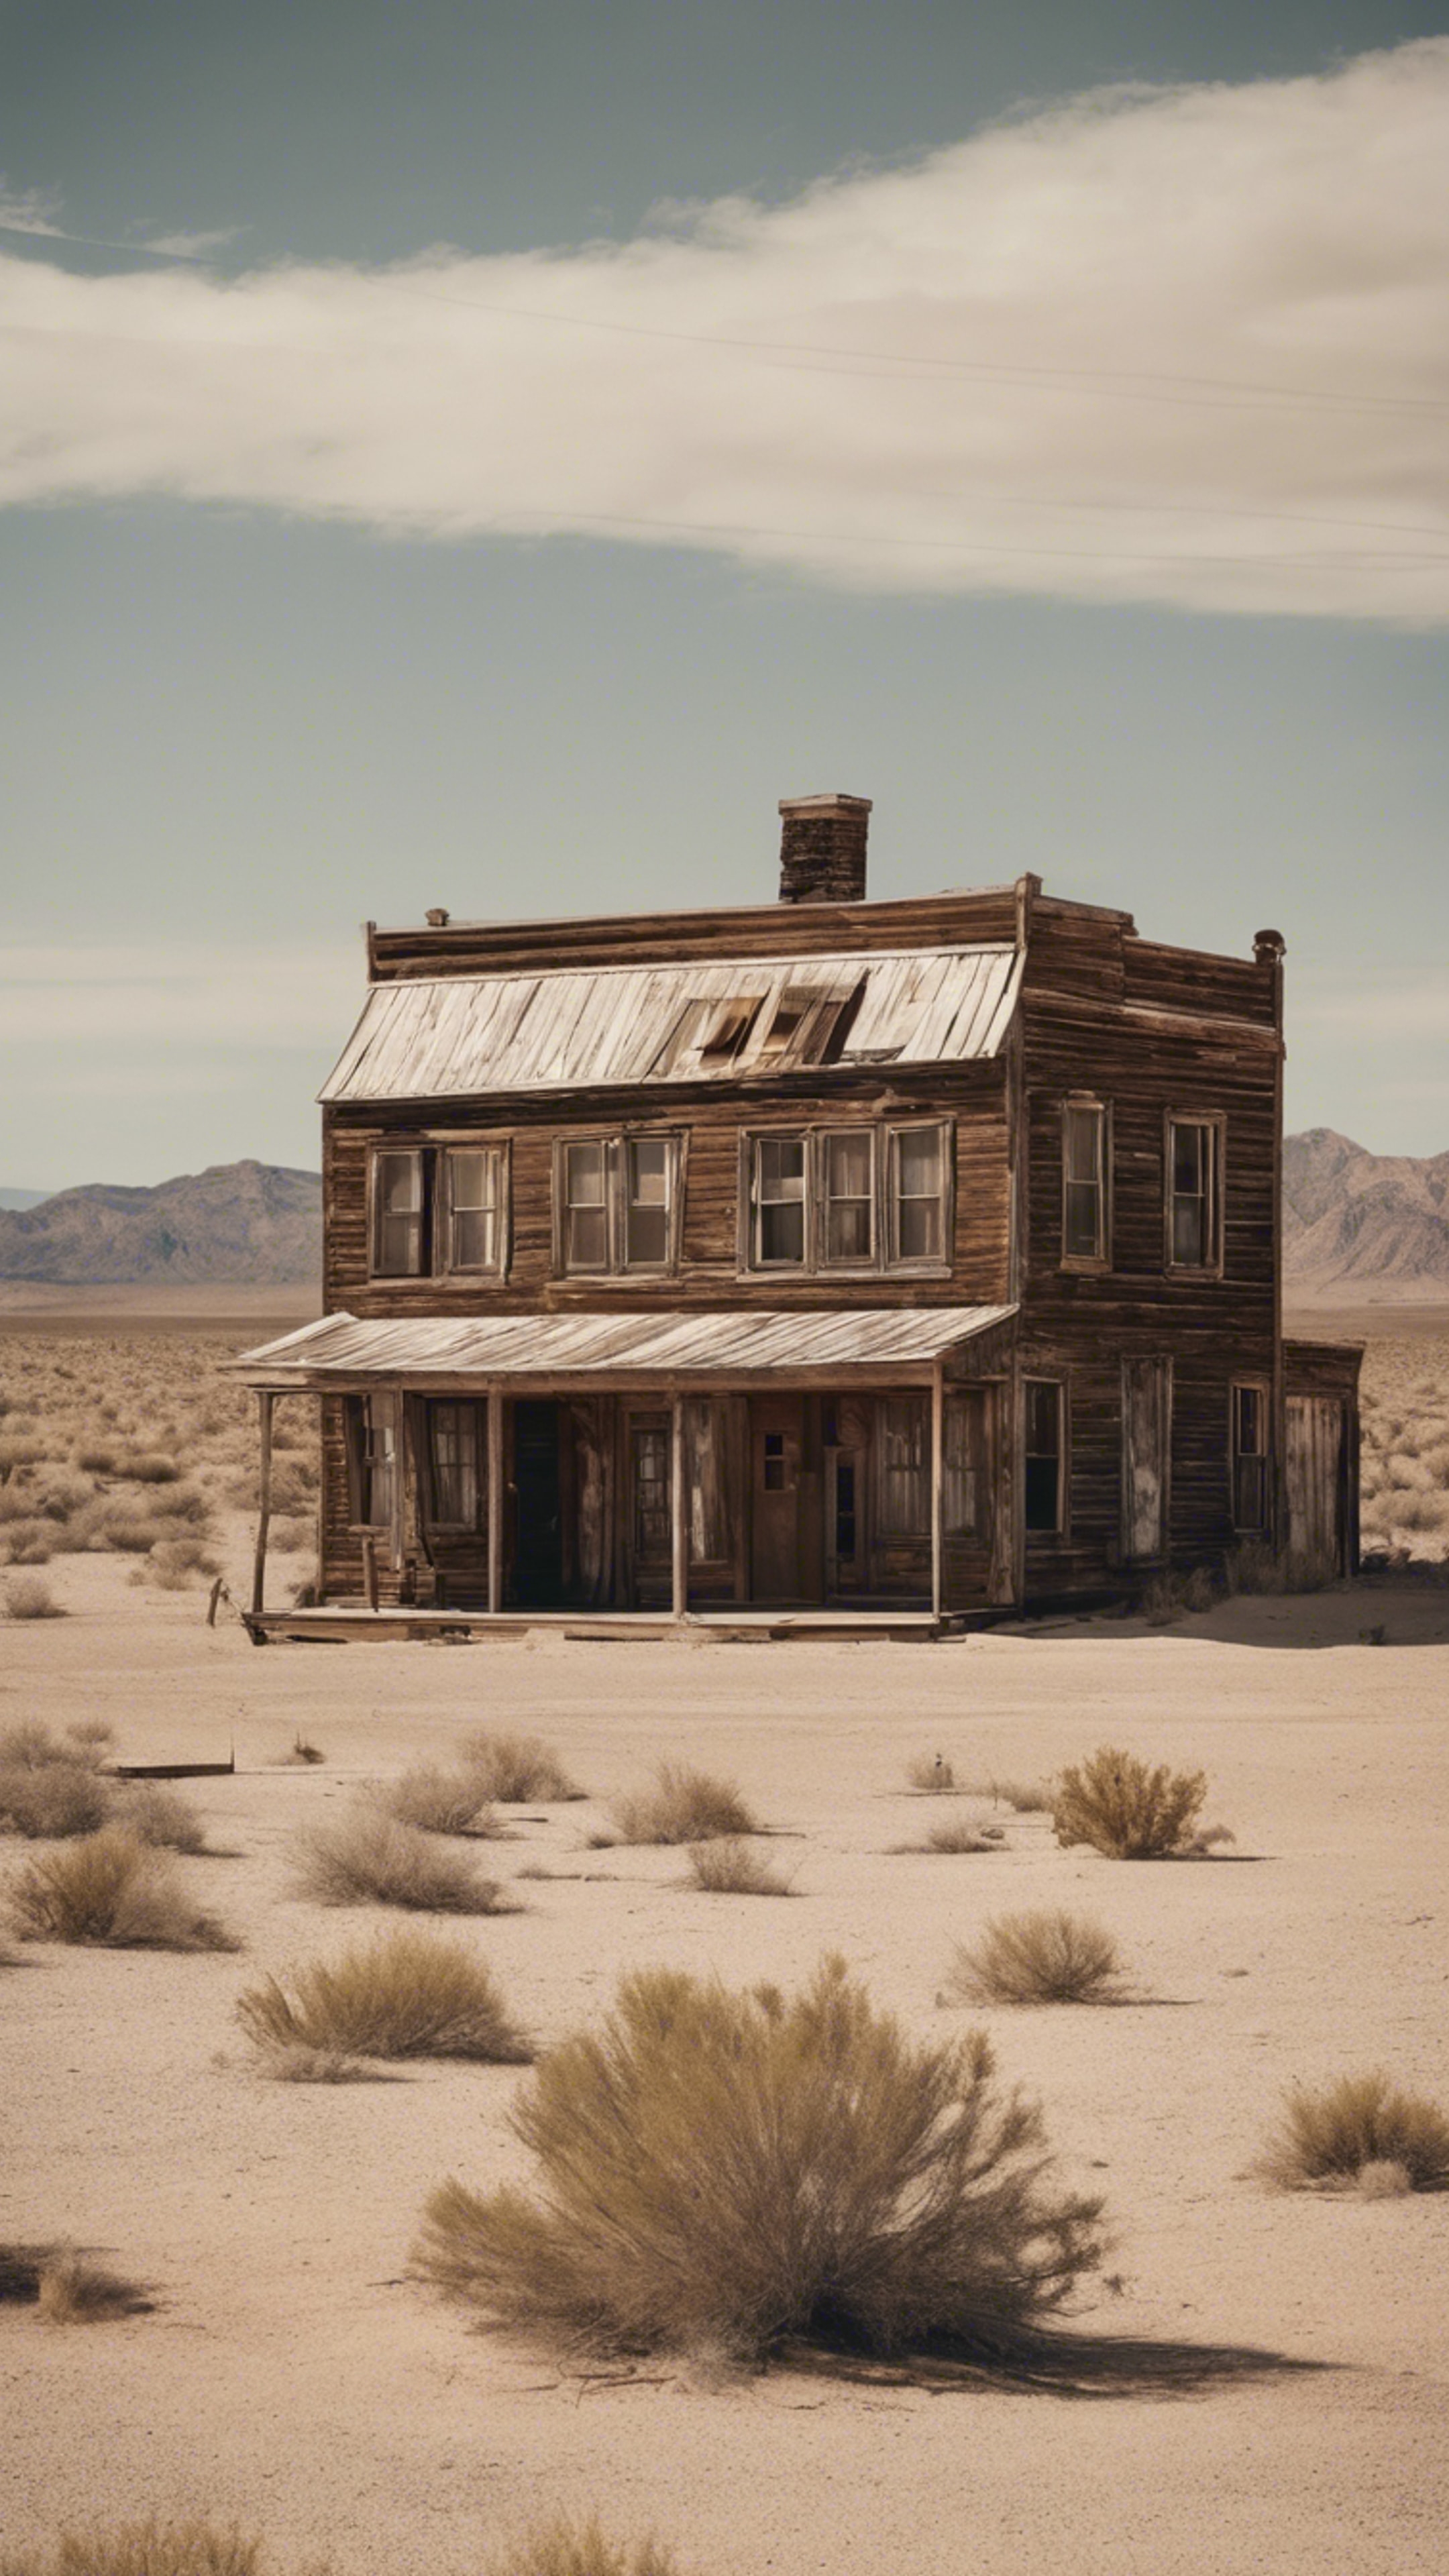 An old western ghost town located in the heart of an inhospitable sandy desert. Behang[5d1c1c6d4731481194e6]